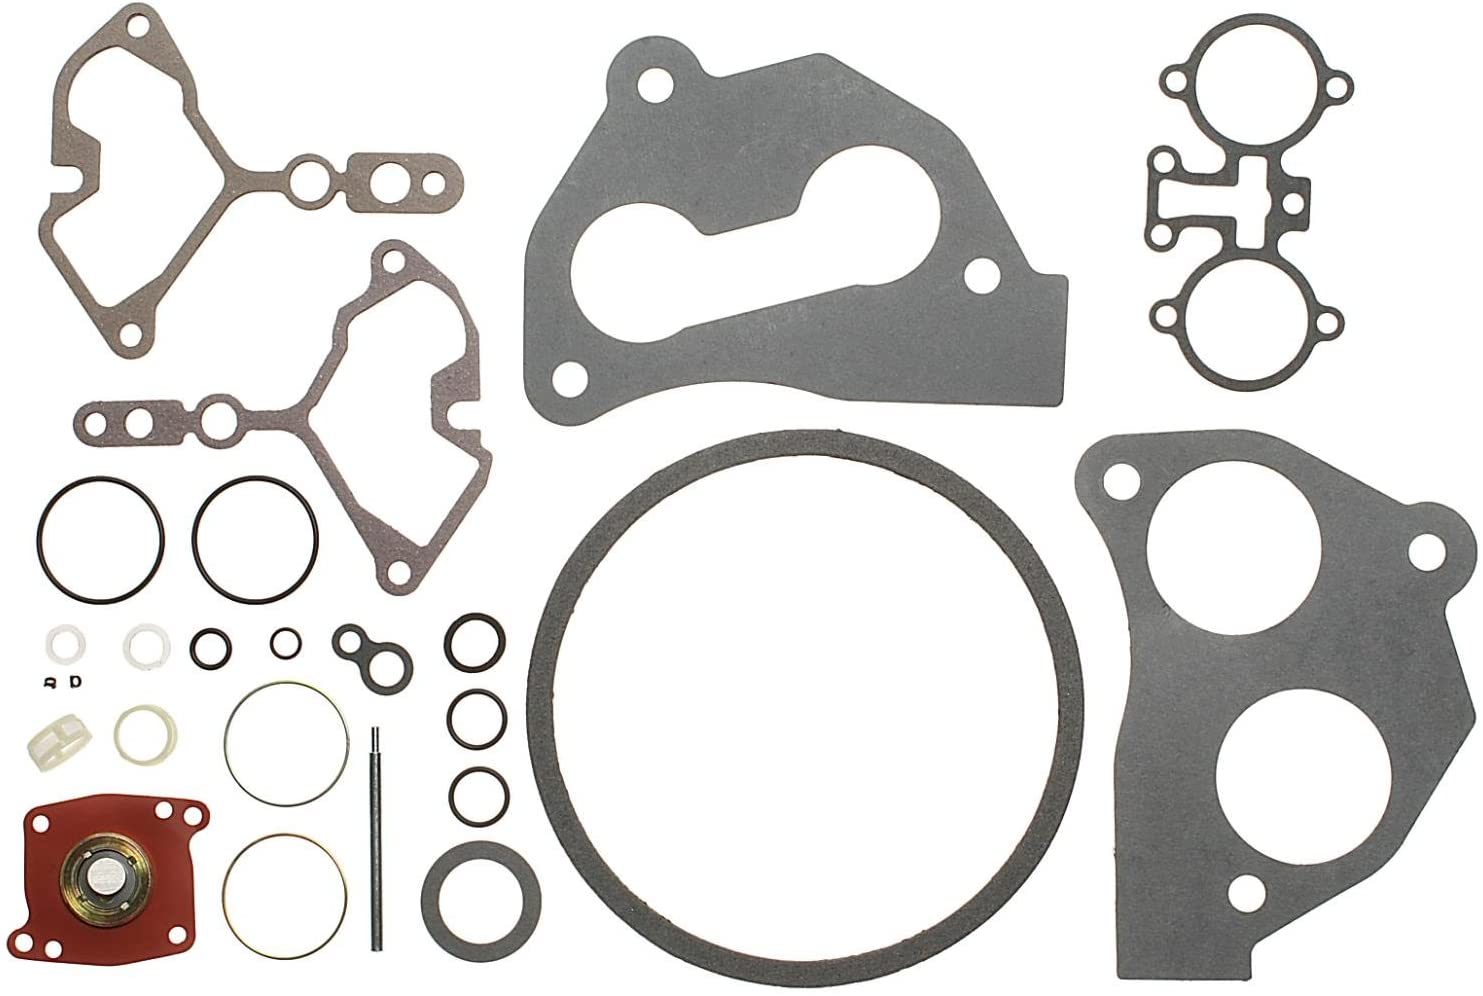 ACDelco 19160313 Professional Fuel Injection Throttle Body Gasket Kit